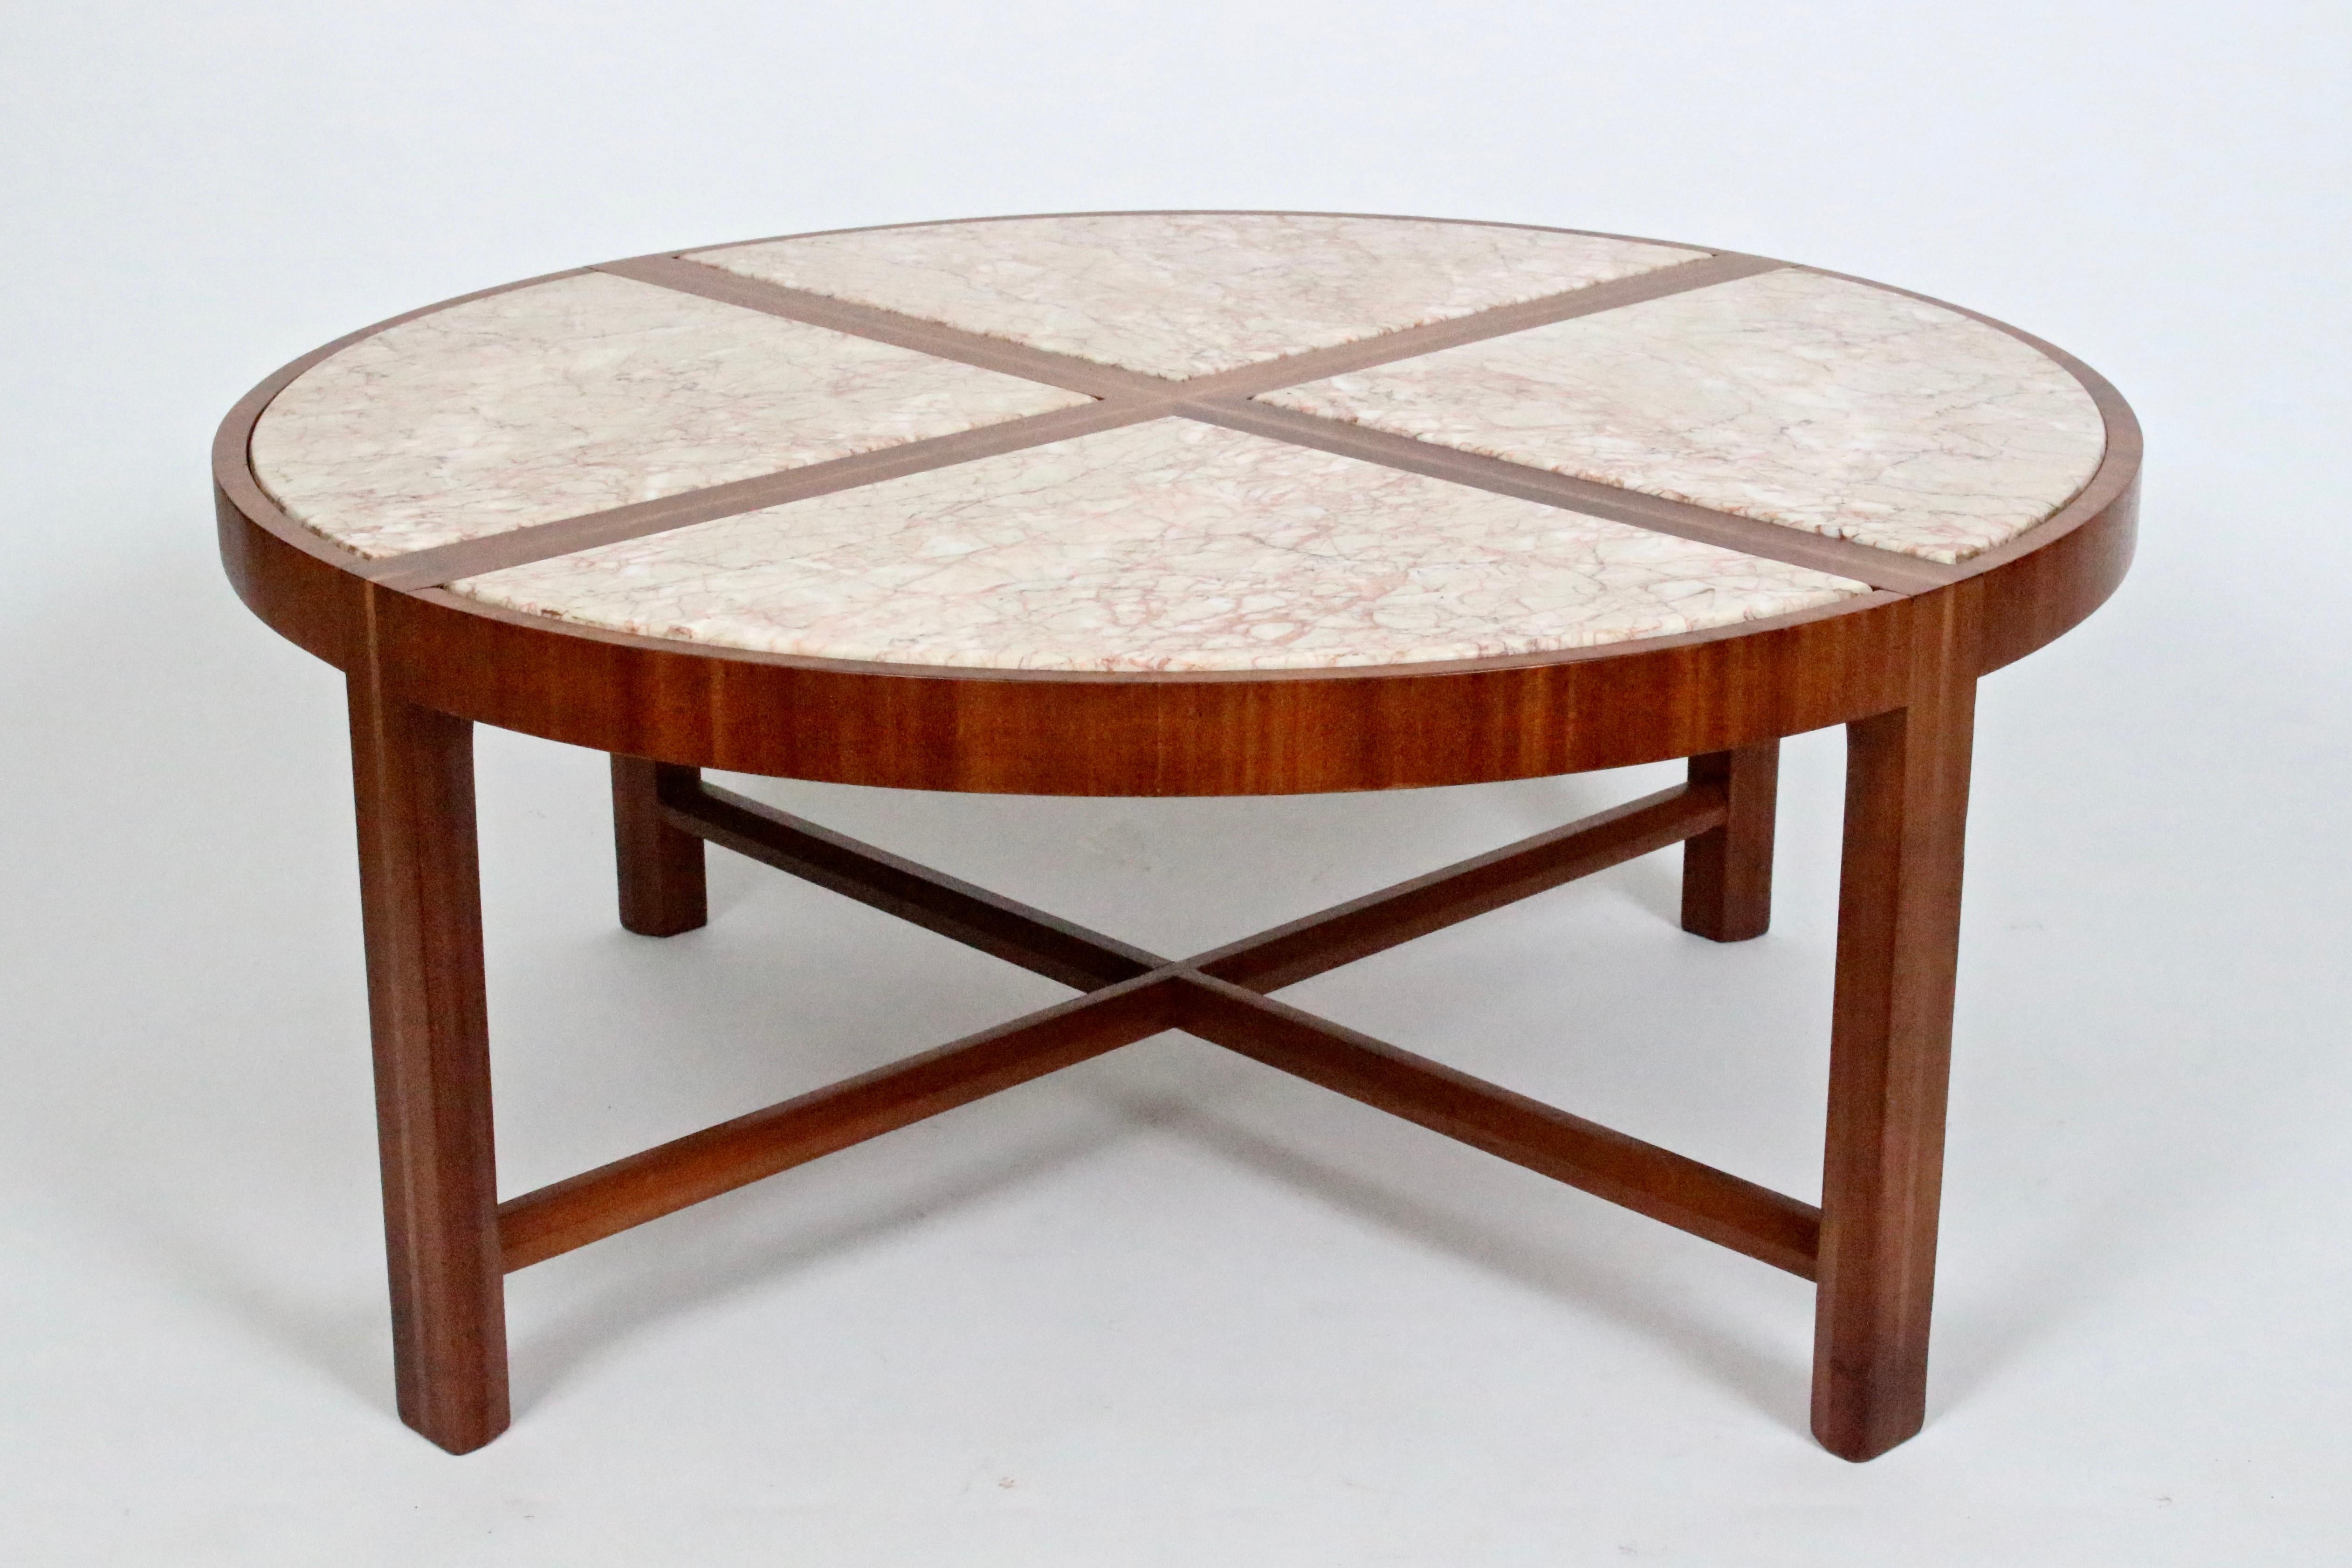 Tommi Parzinger for Charak Modern Marble and Mahogany Coffee Table, 1950s. Featuring a sturdy, inlaid mahogany framework, circular surface divided quadrant area inset with Rosa Norvegia marble. Hues in pink, cream and white. Total 5 pieces.